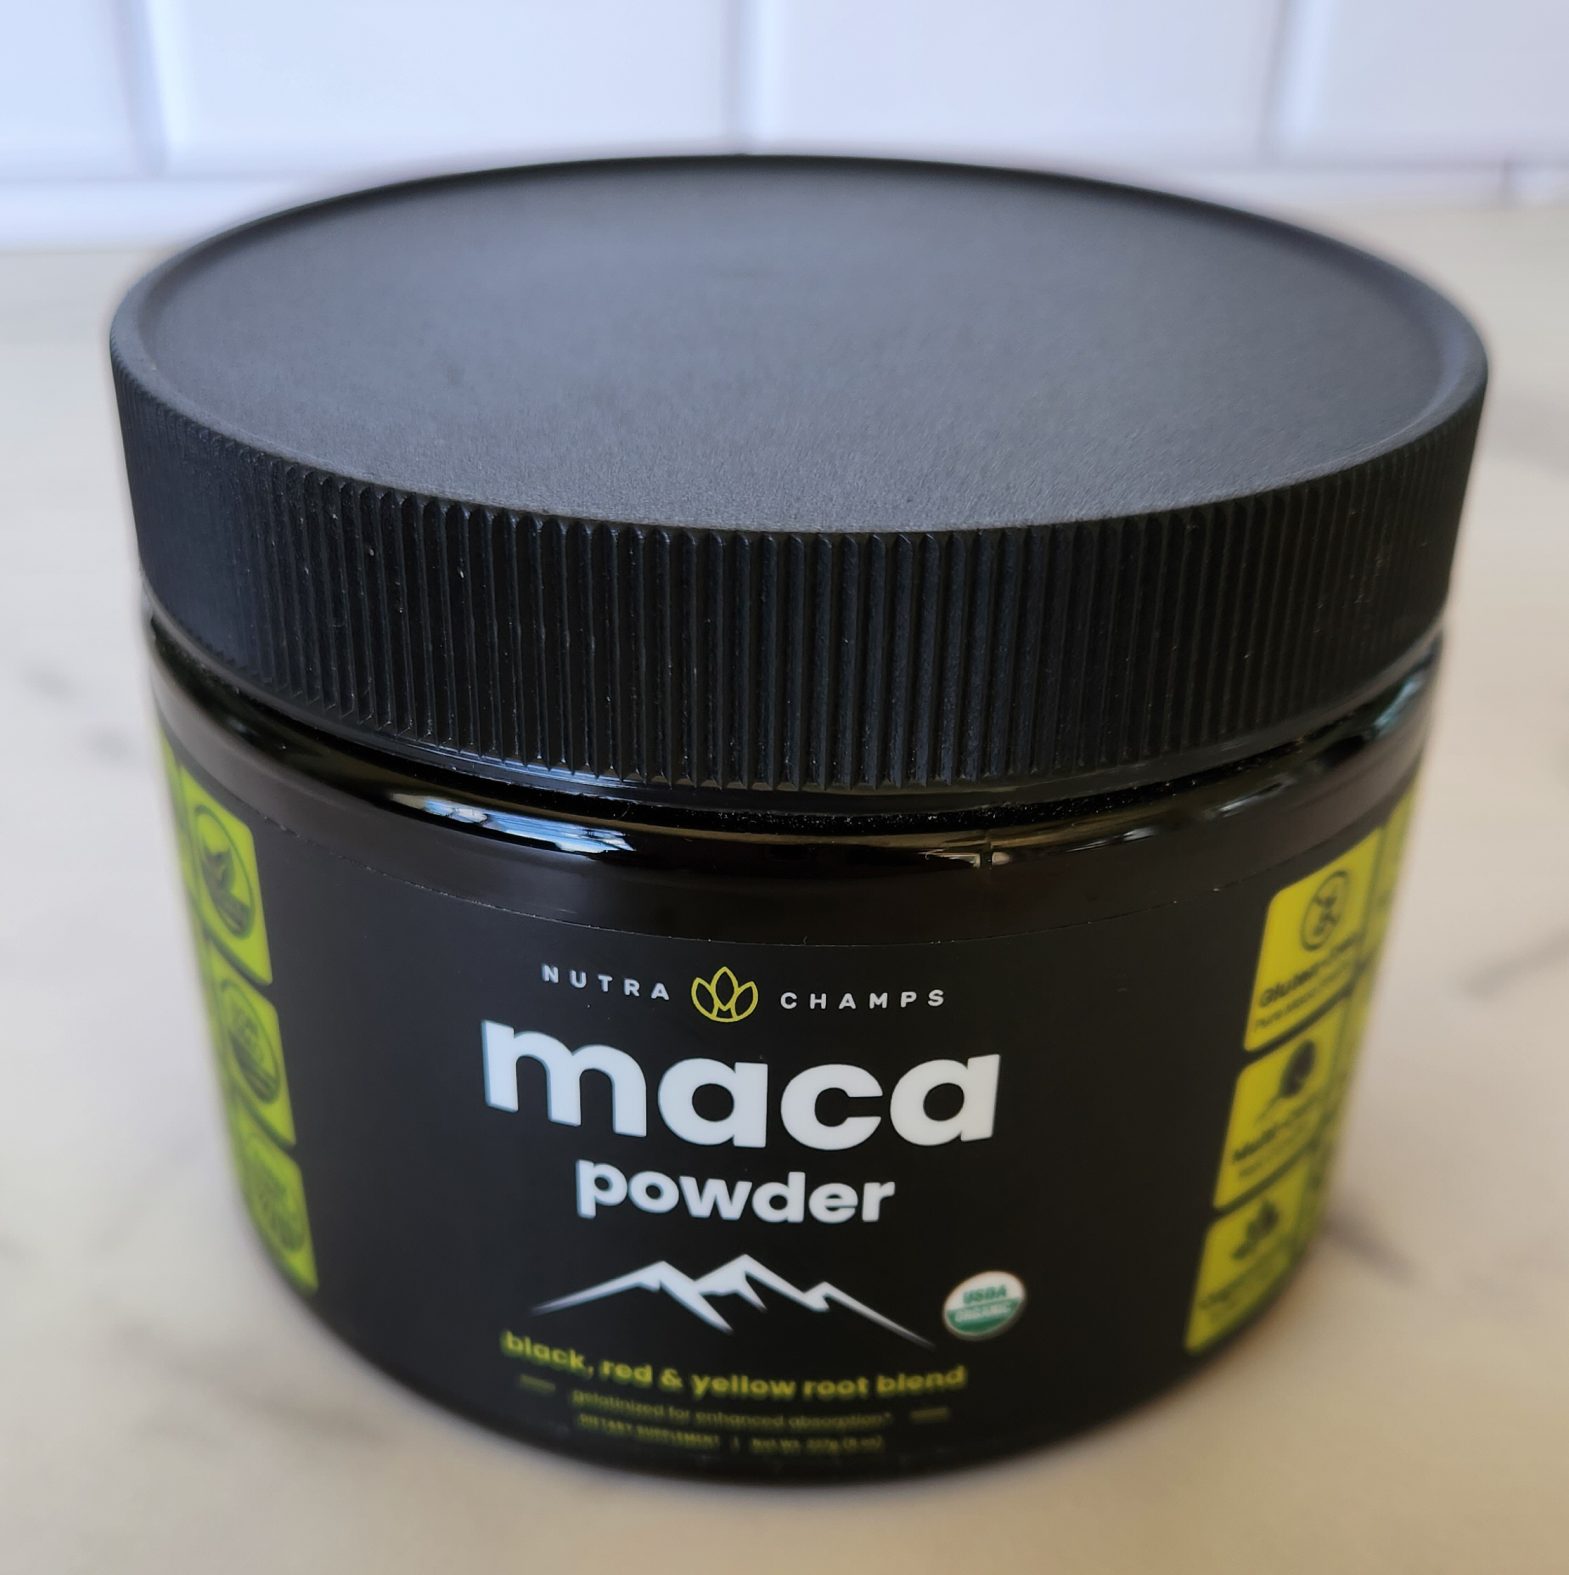 Nutra Champs Maca Powder product